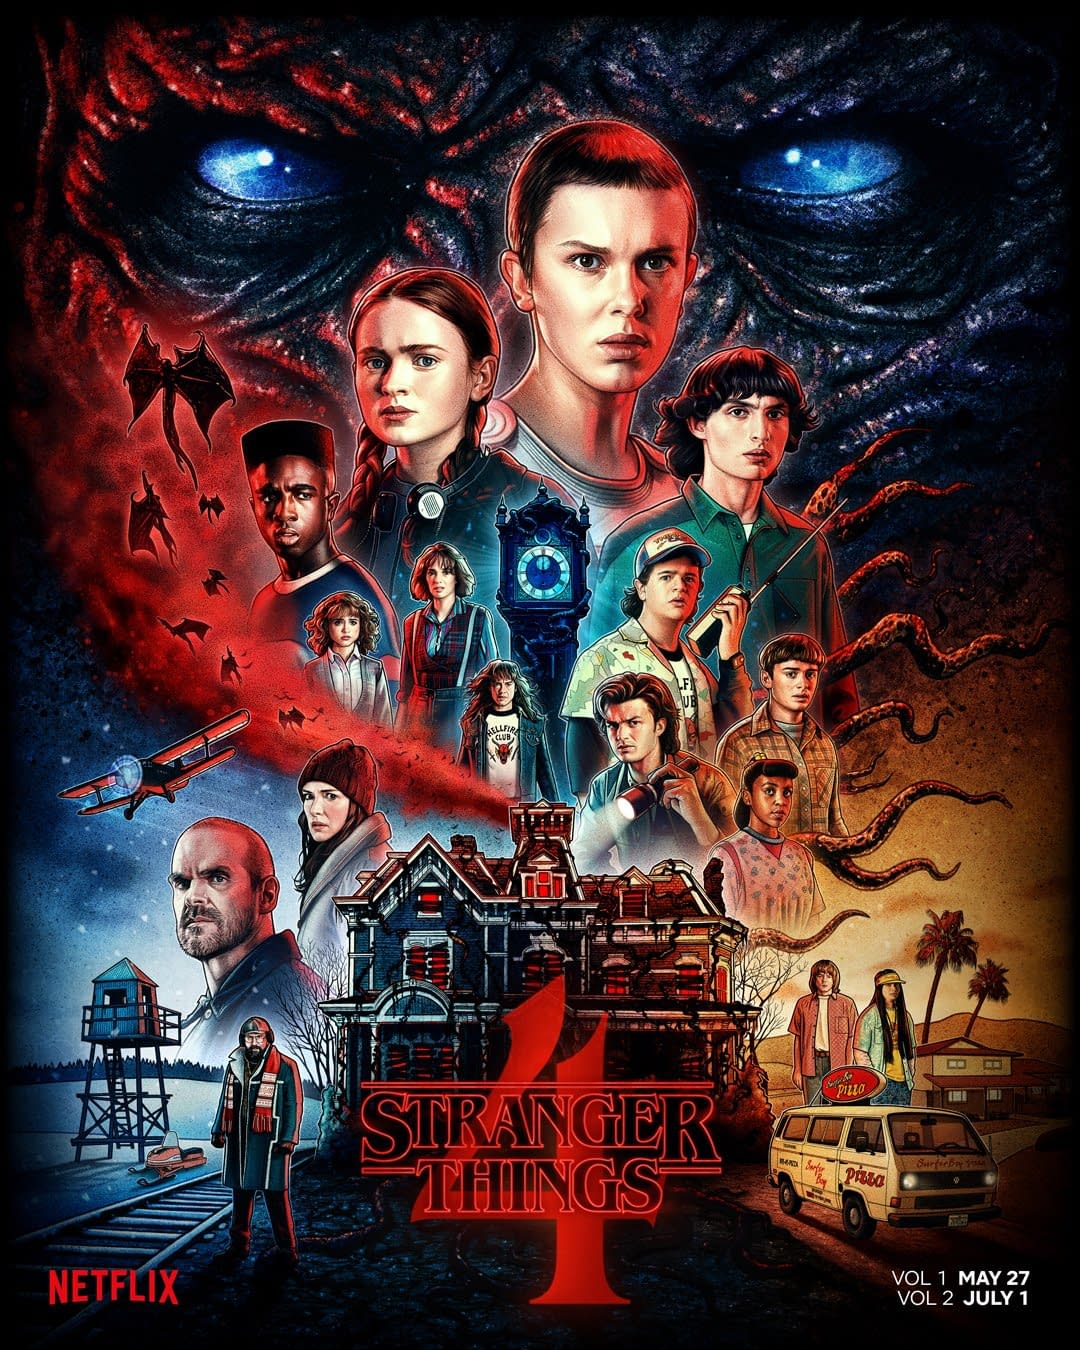 Stranger Things 4 Netflix Releases New Poster Preview Images 1080x1350